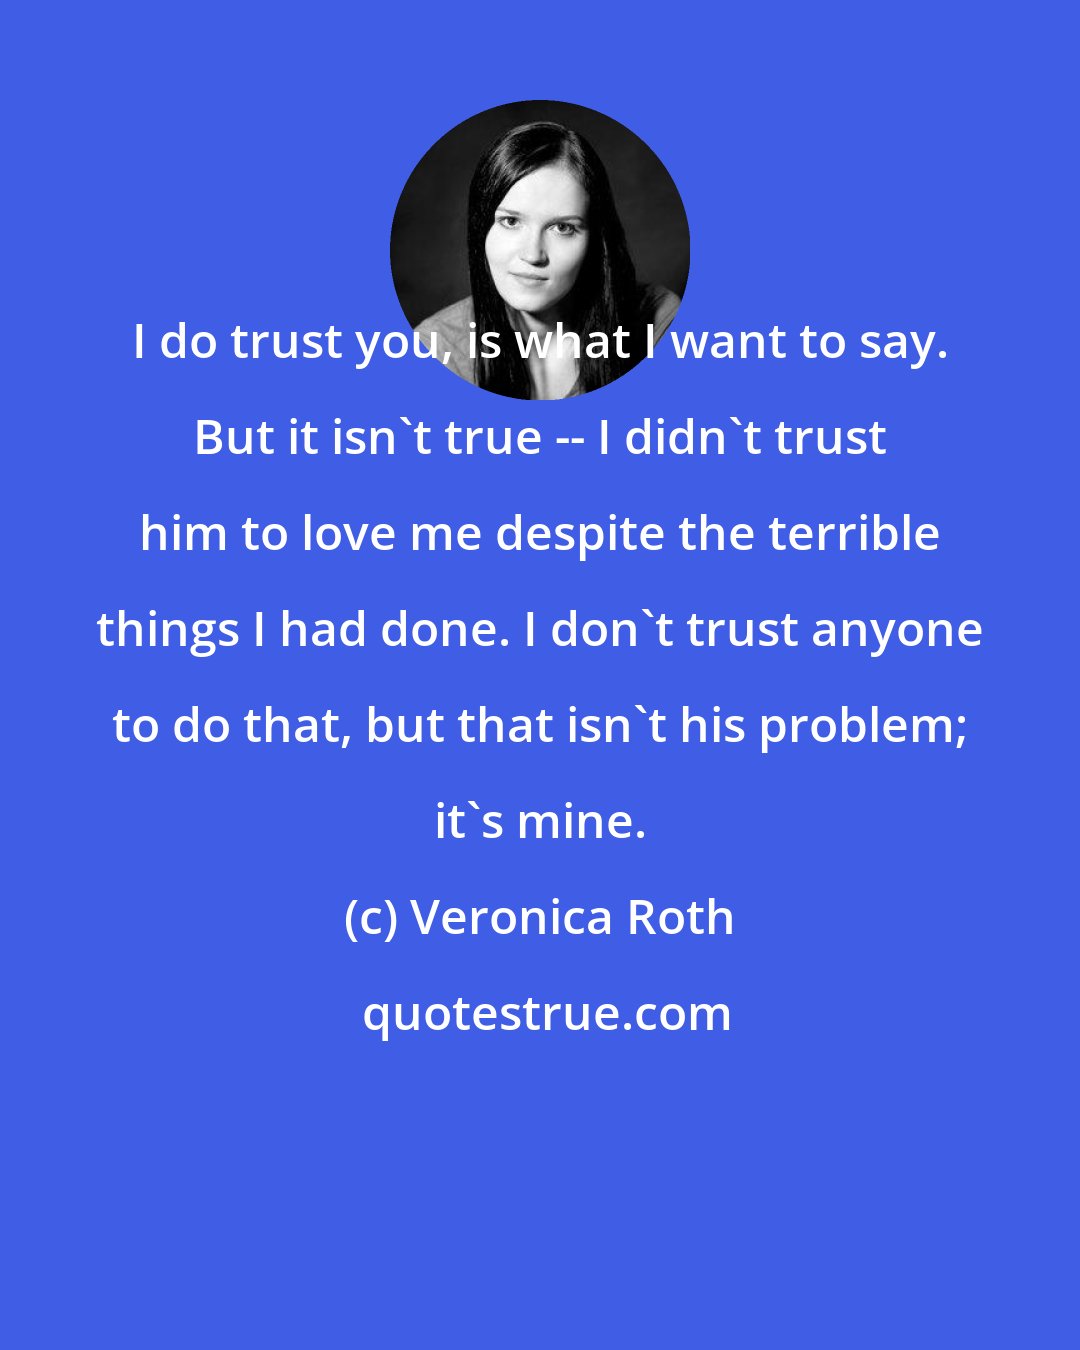 Veronica Roth: I do trust you, is what I want to say. But it isn't true -- I didn't trust him to love me despite the terrible things I had done. I don't trust anyone to do that, but that isn't his problem; it's mine.